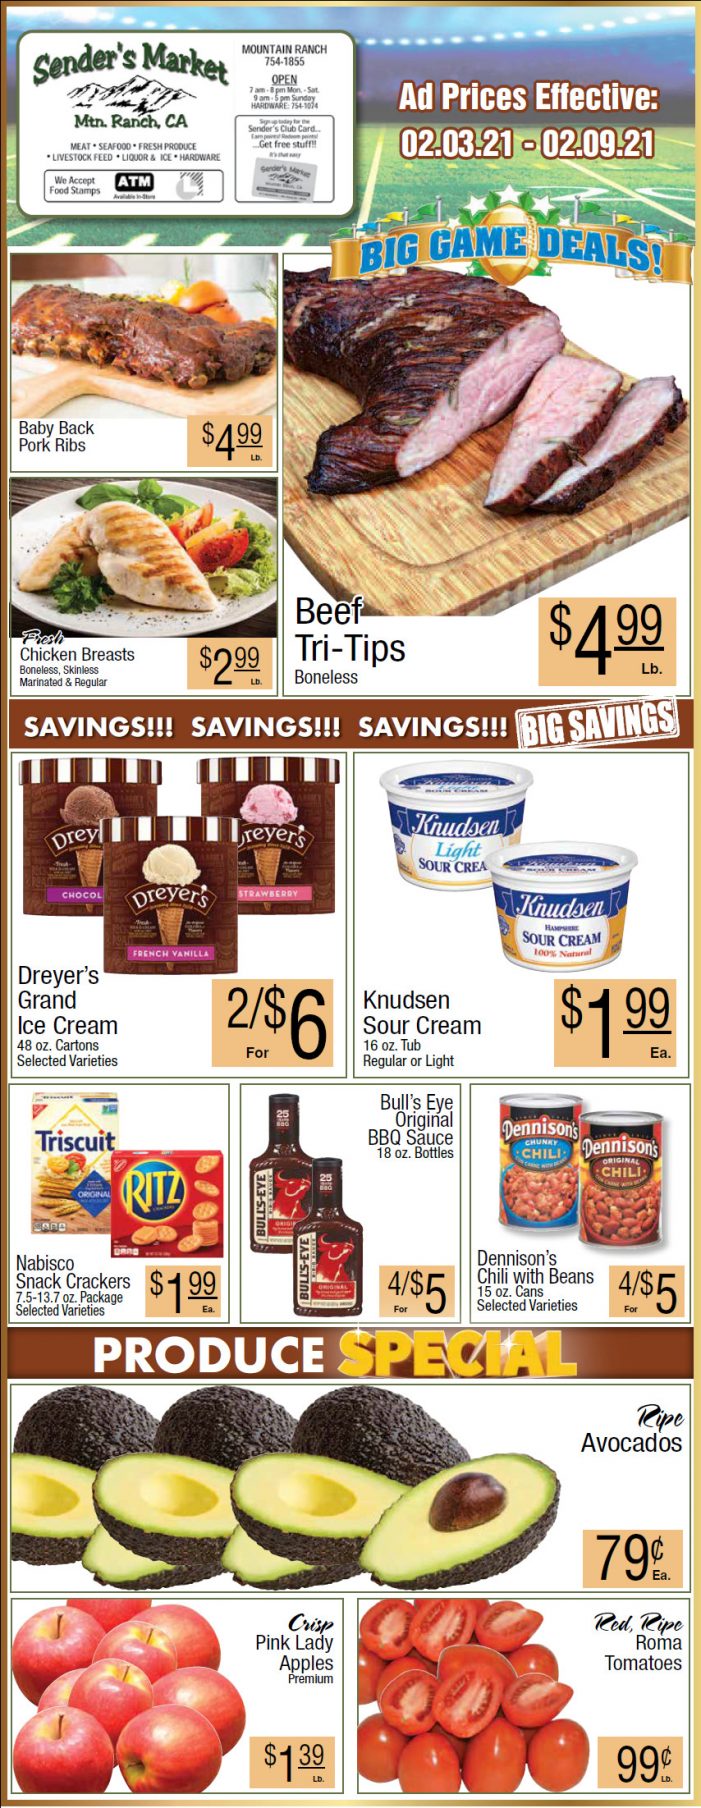 Sender’s Market’s Weekly Ad & Grocery Specials Through February 9th!  Shop Local & Save!